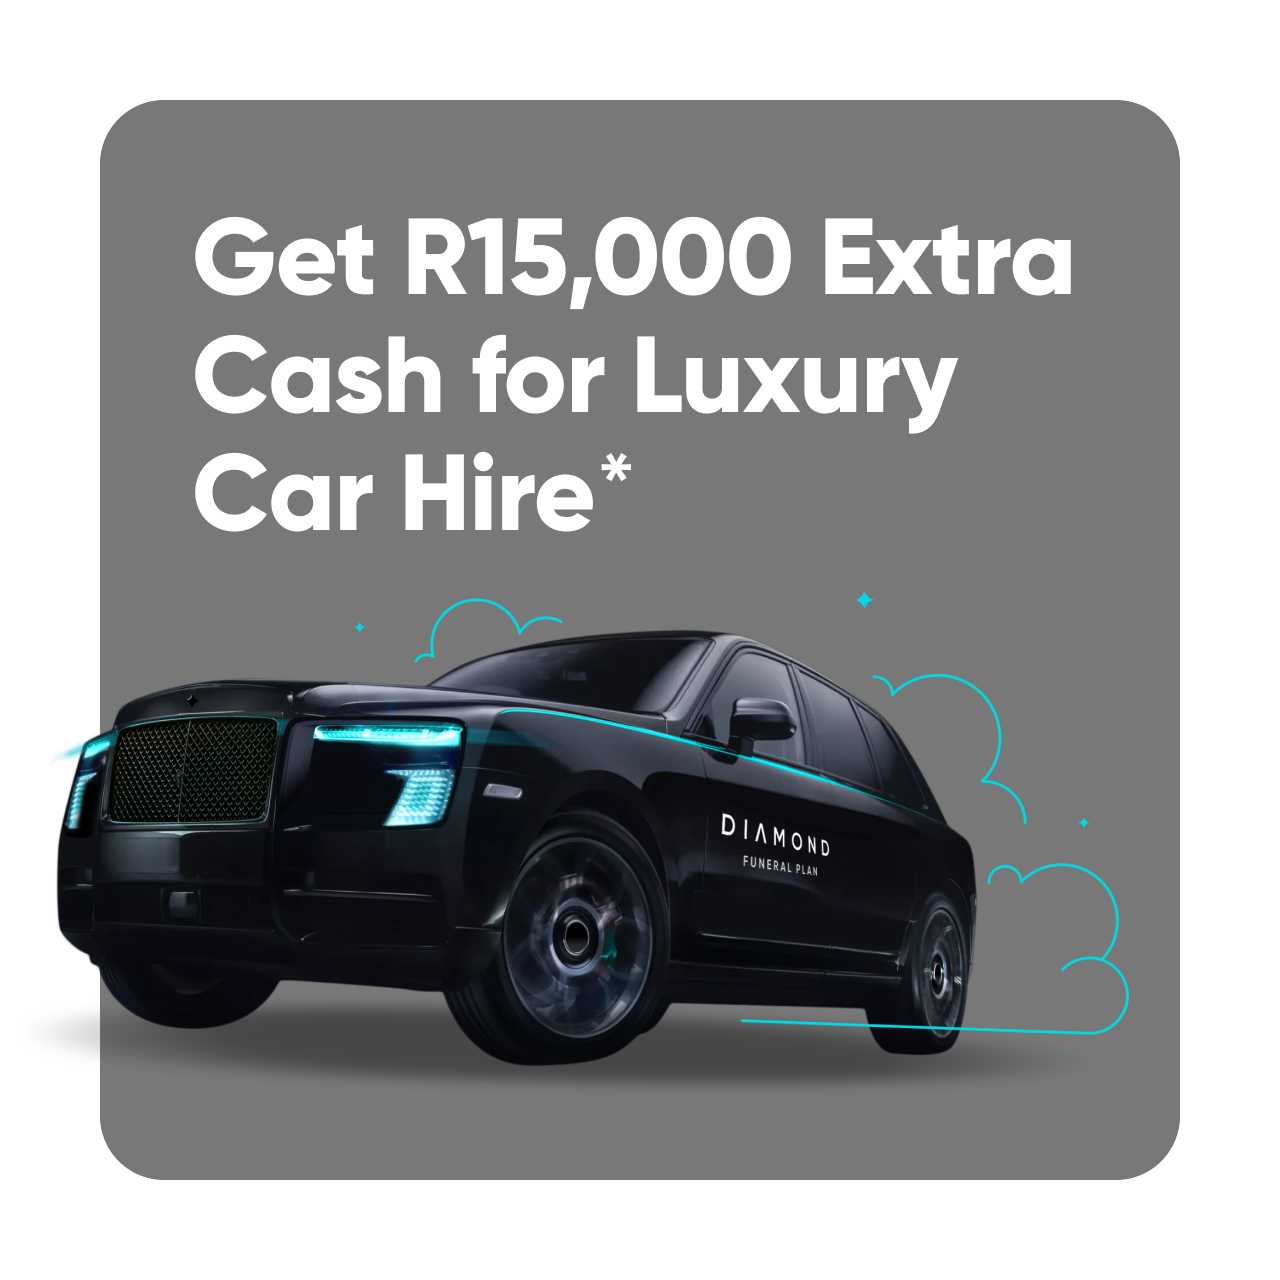 Get R15,000 Extra Cash for Luxury Car Hire